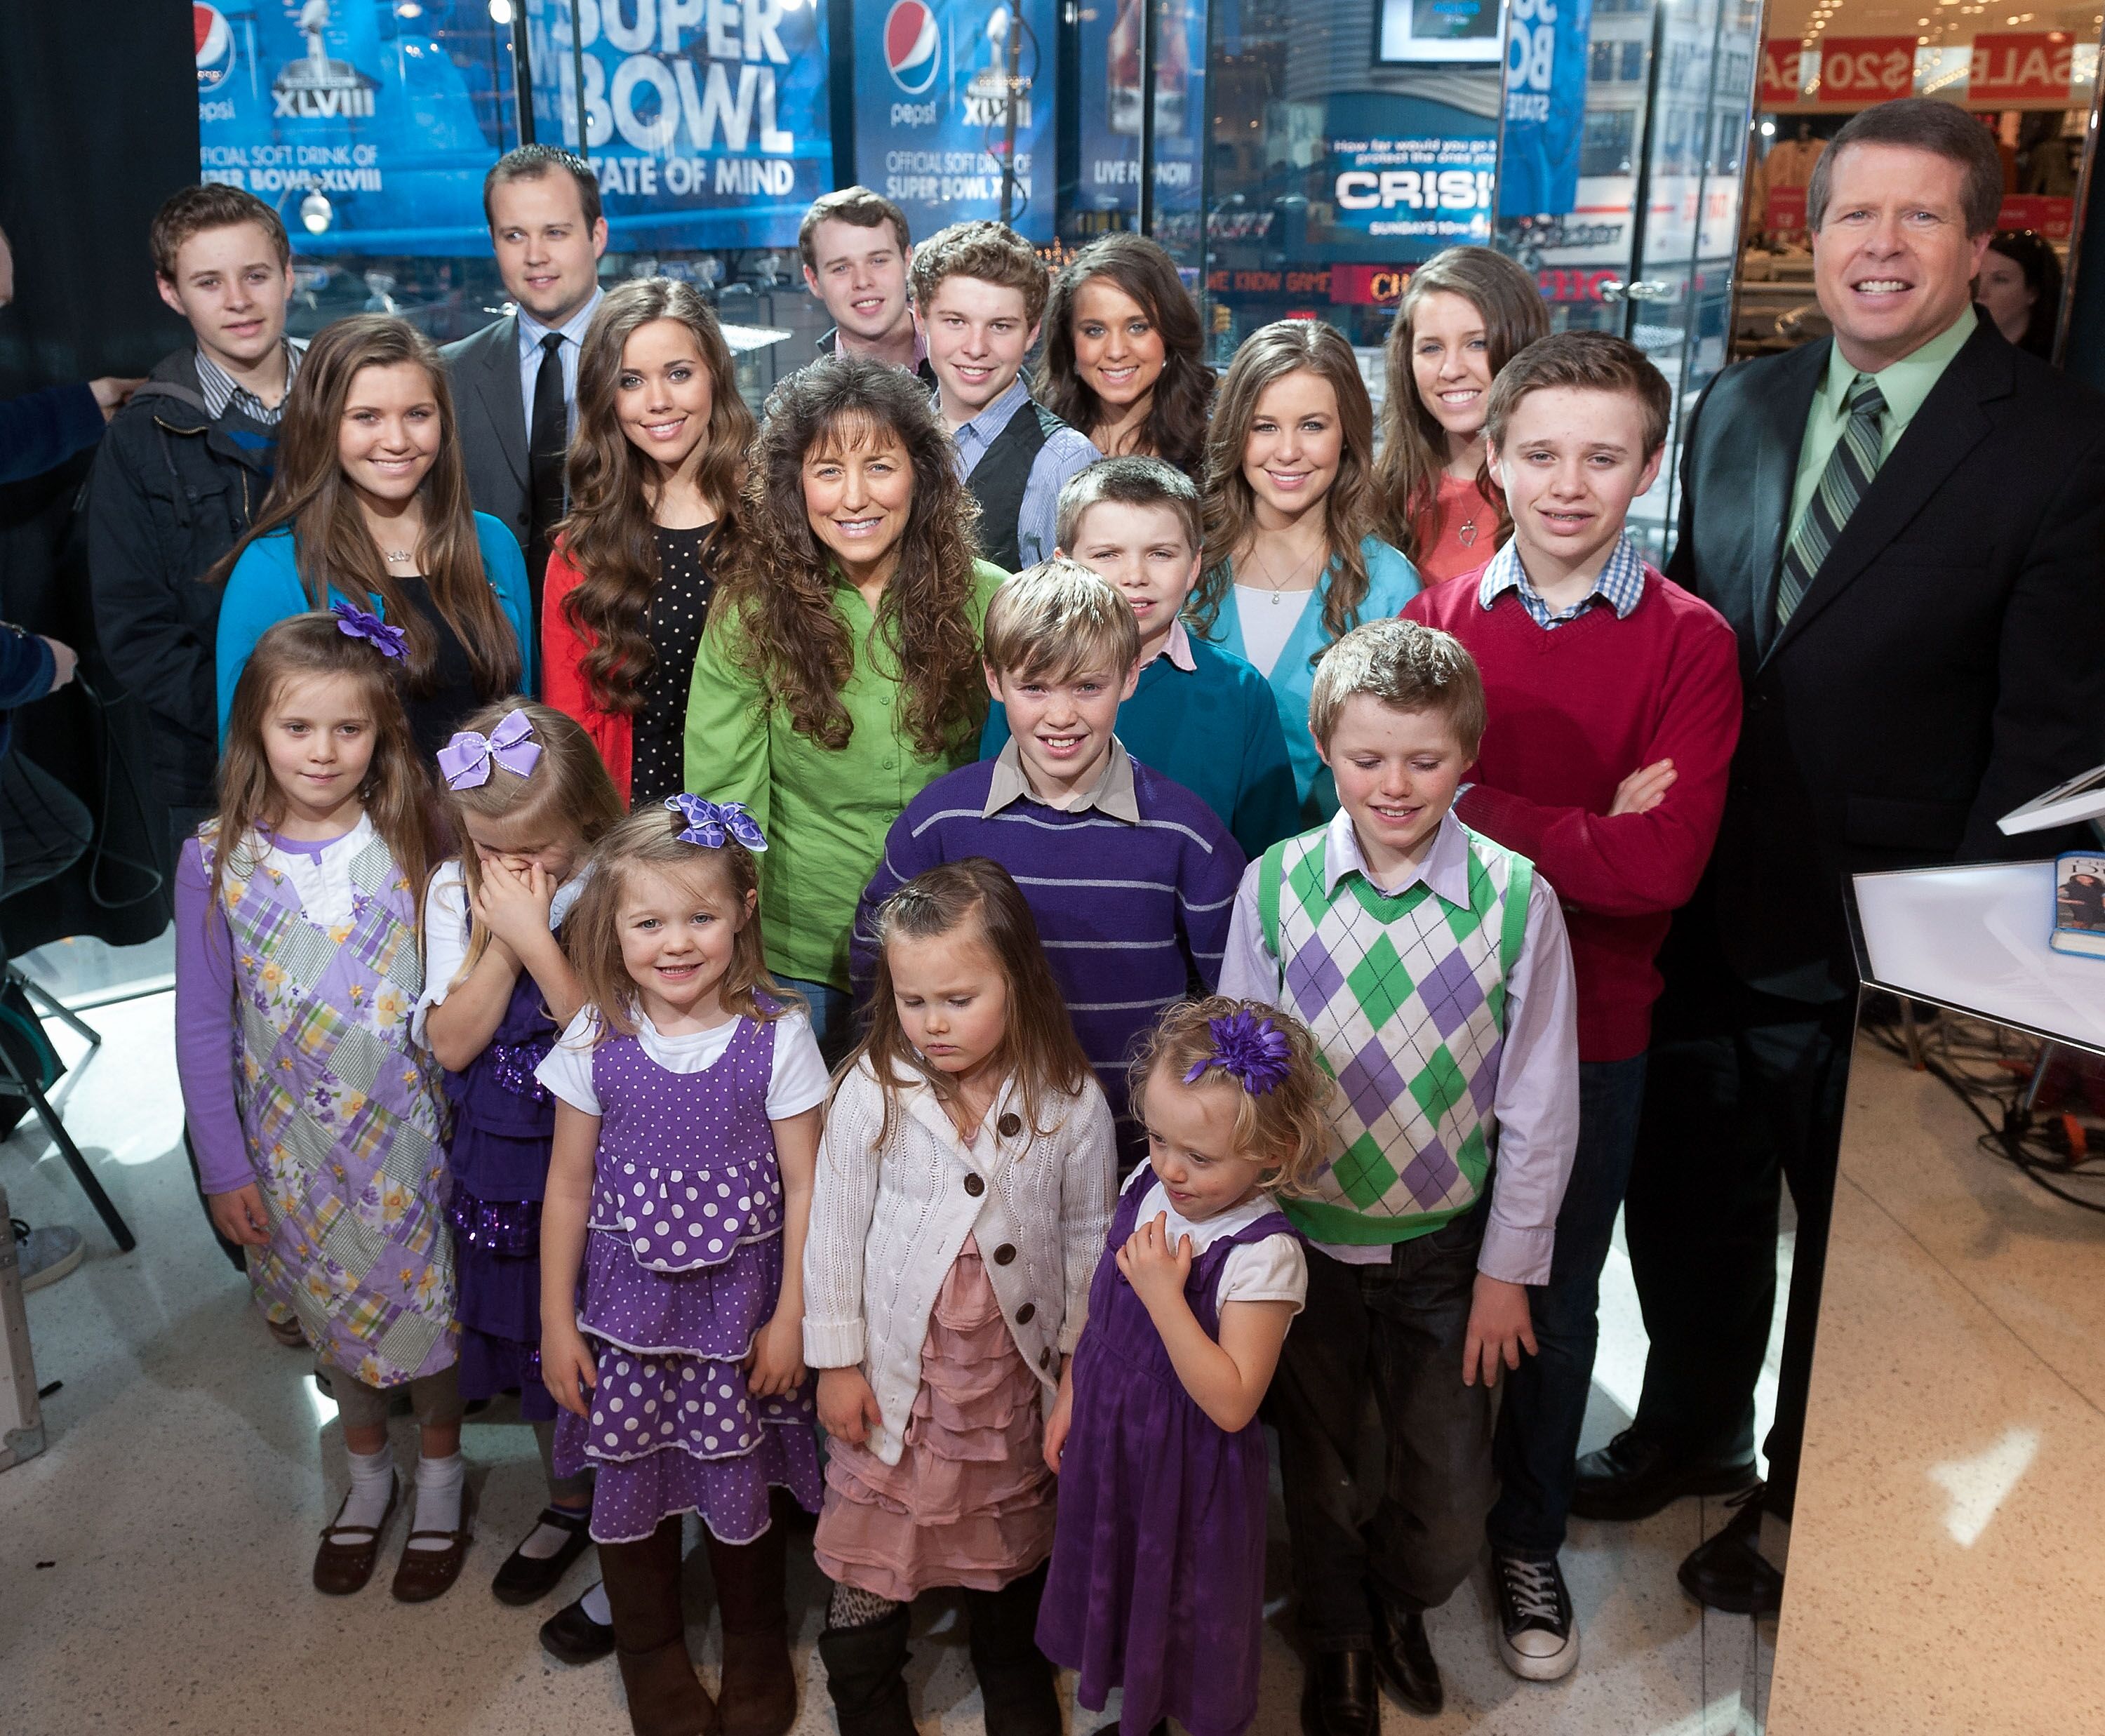 The Duggar family visits "Extra" at their New York studios at H&M in Times Square on March 11, 2013 | Photo: Getty Images